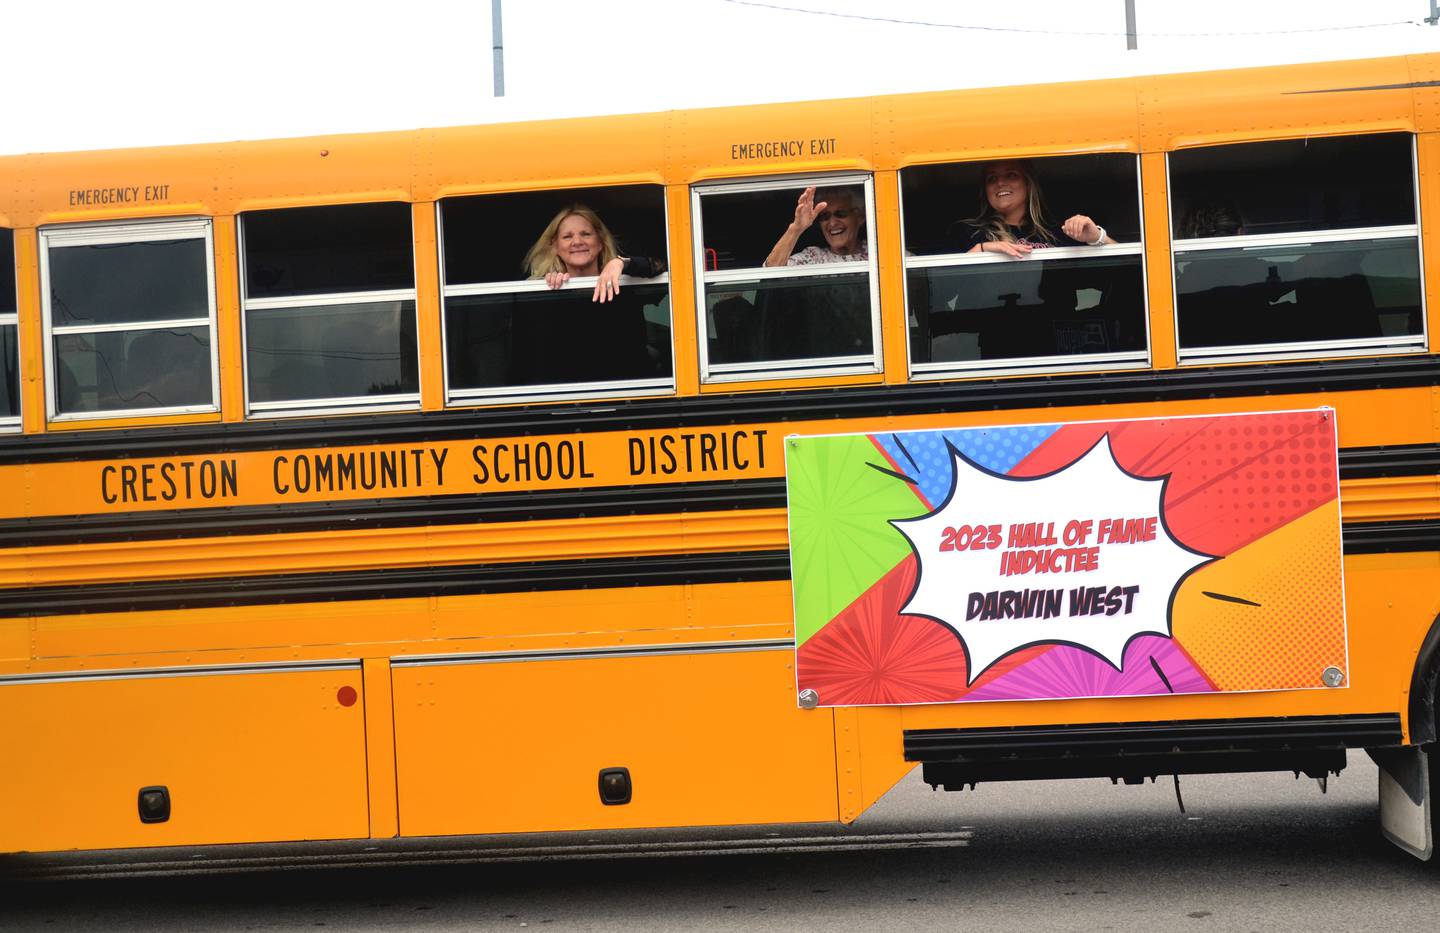 The family of Darwin West waves to the crowd from a school bus during Friday's homecoming parade.